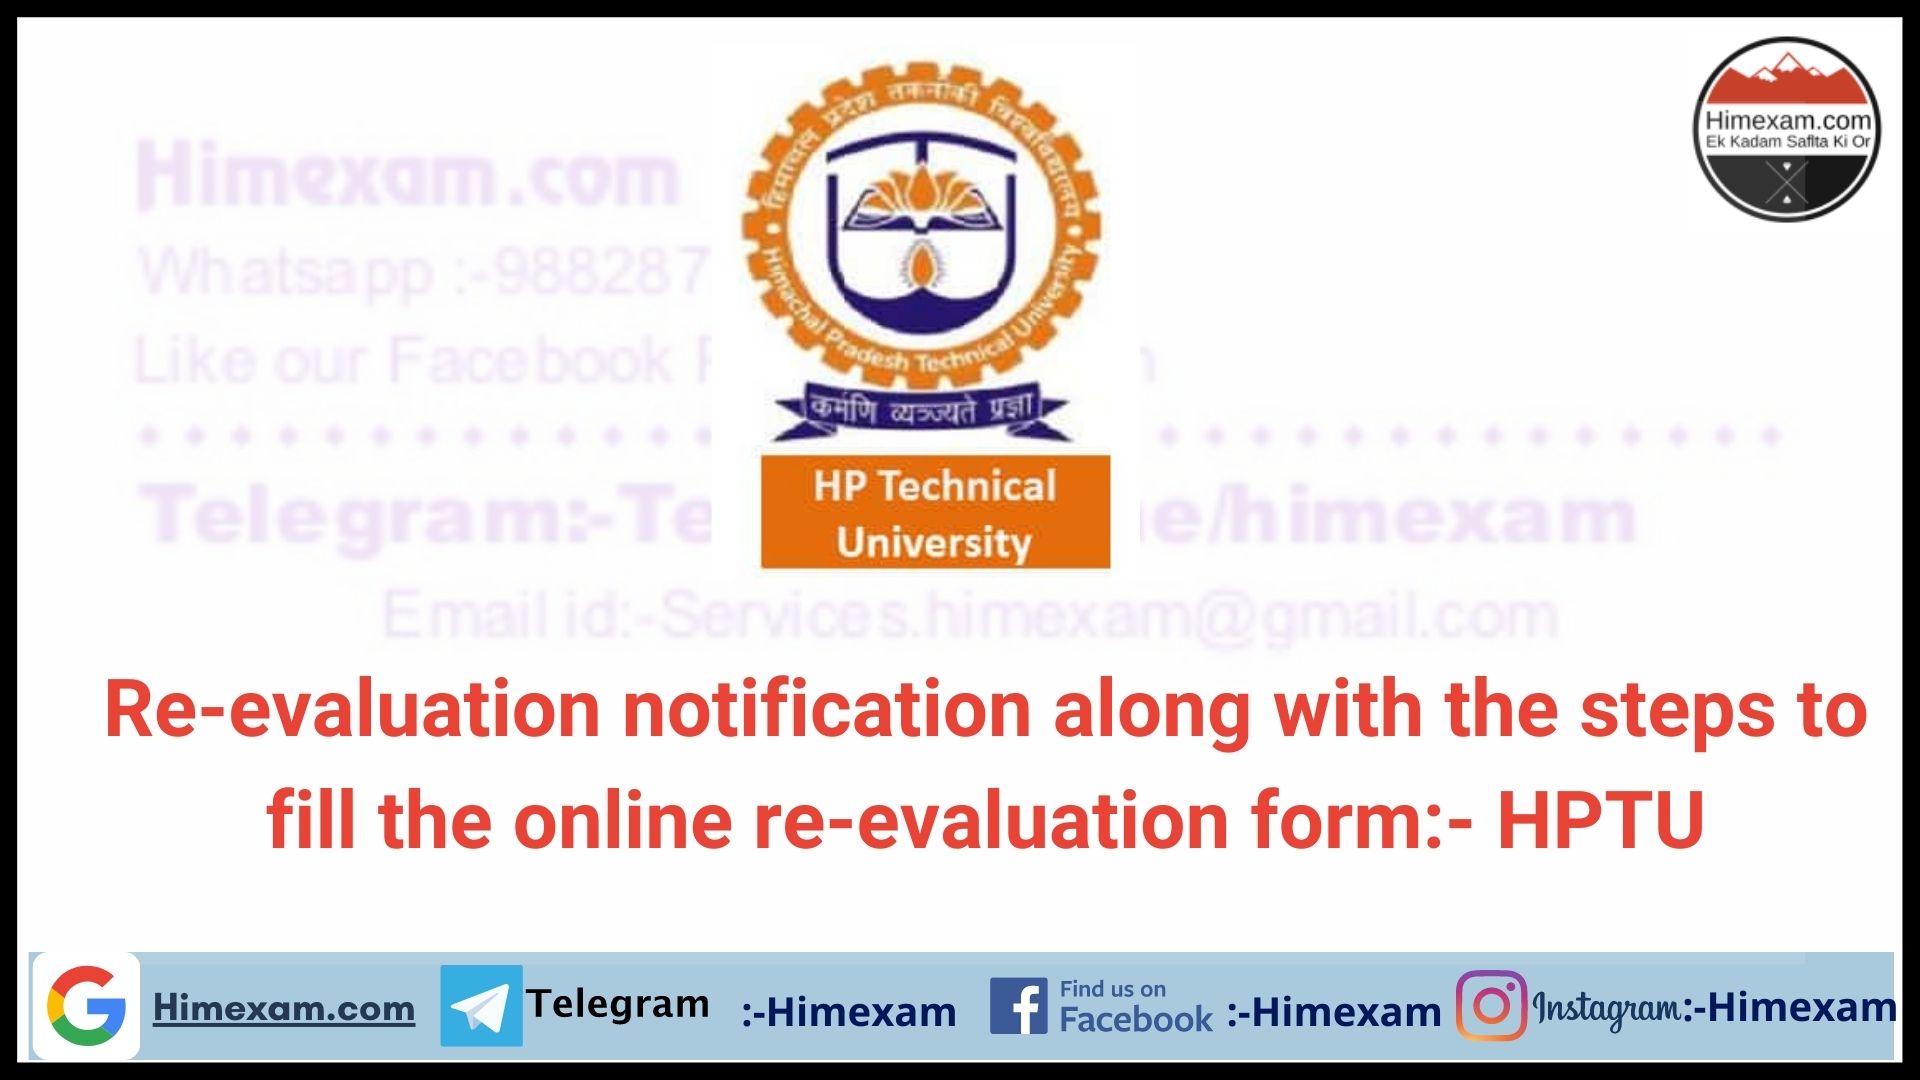 Re-evaluation notification along with the steps to fill the online re-evaluation form:- HPTU